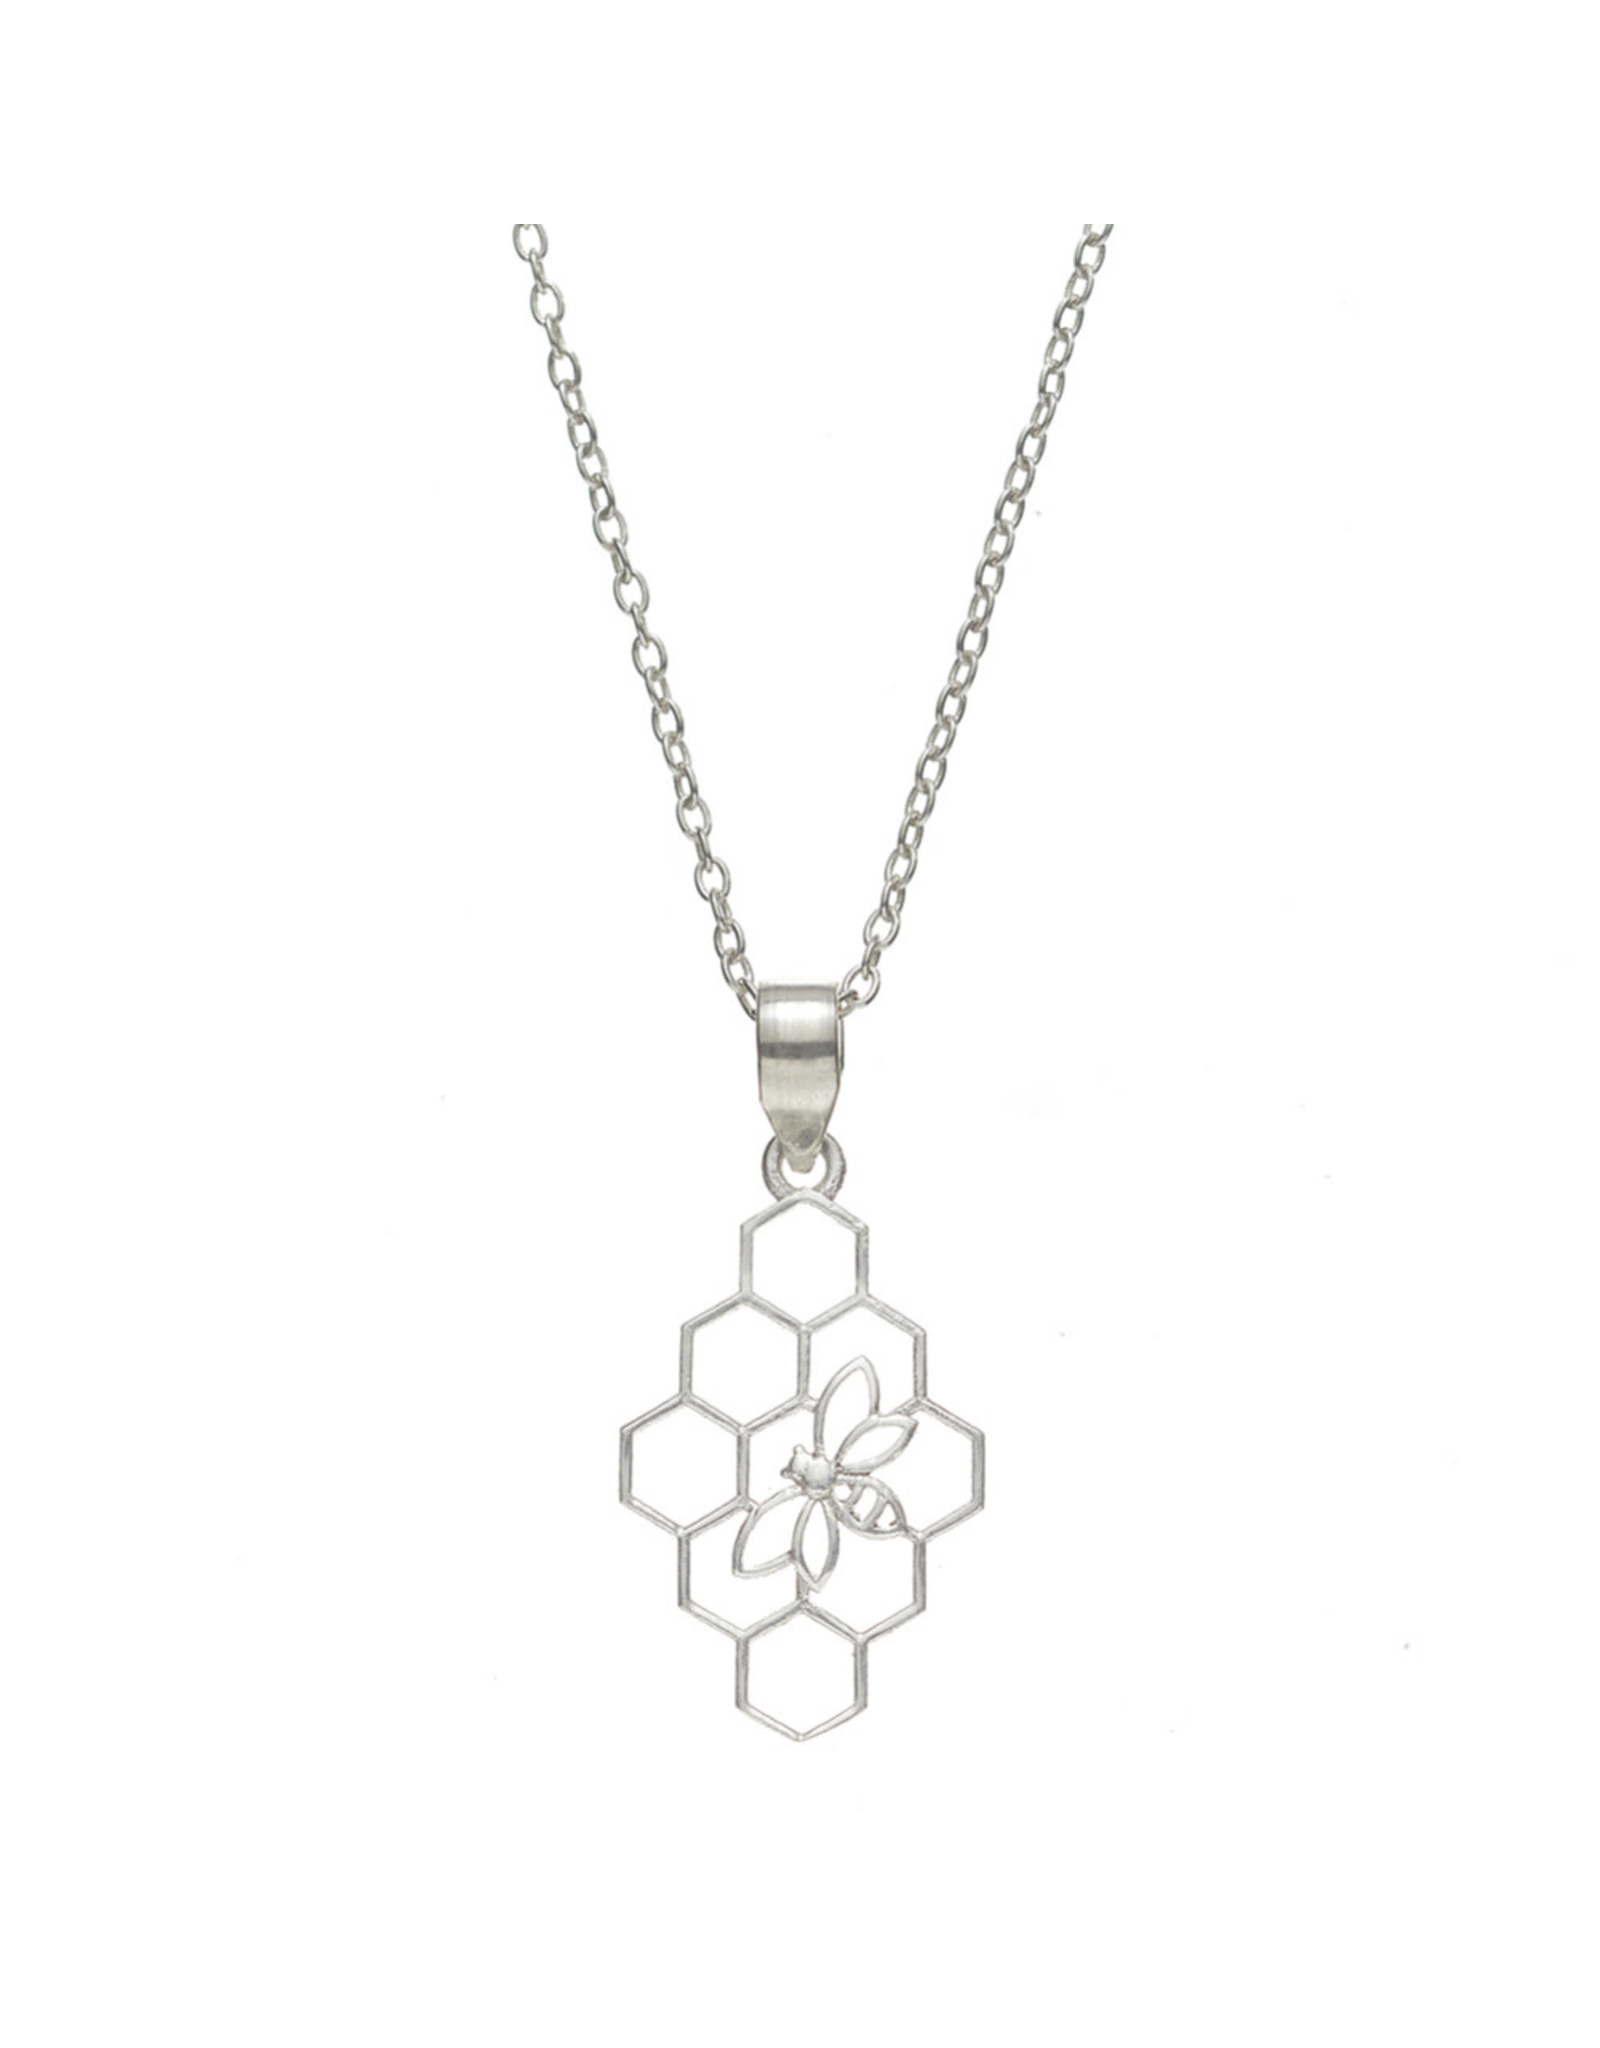 Trade roots Beehive Silver Necklace, India